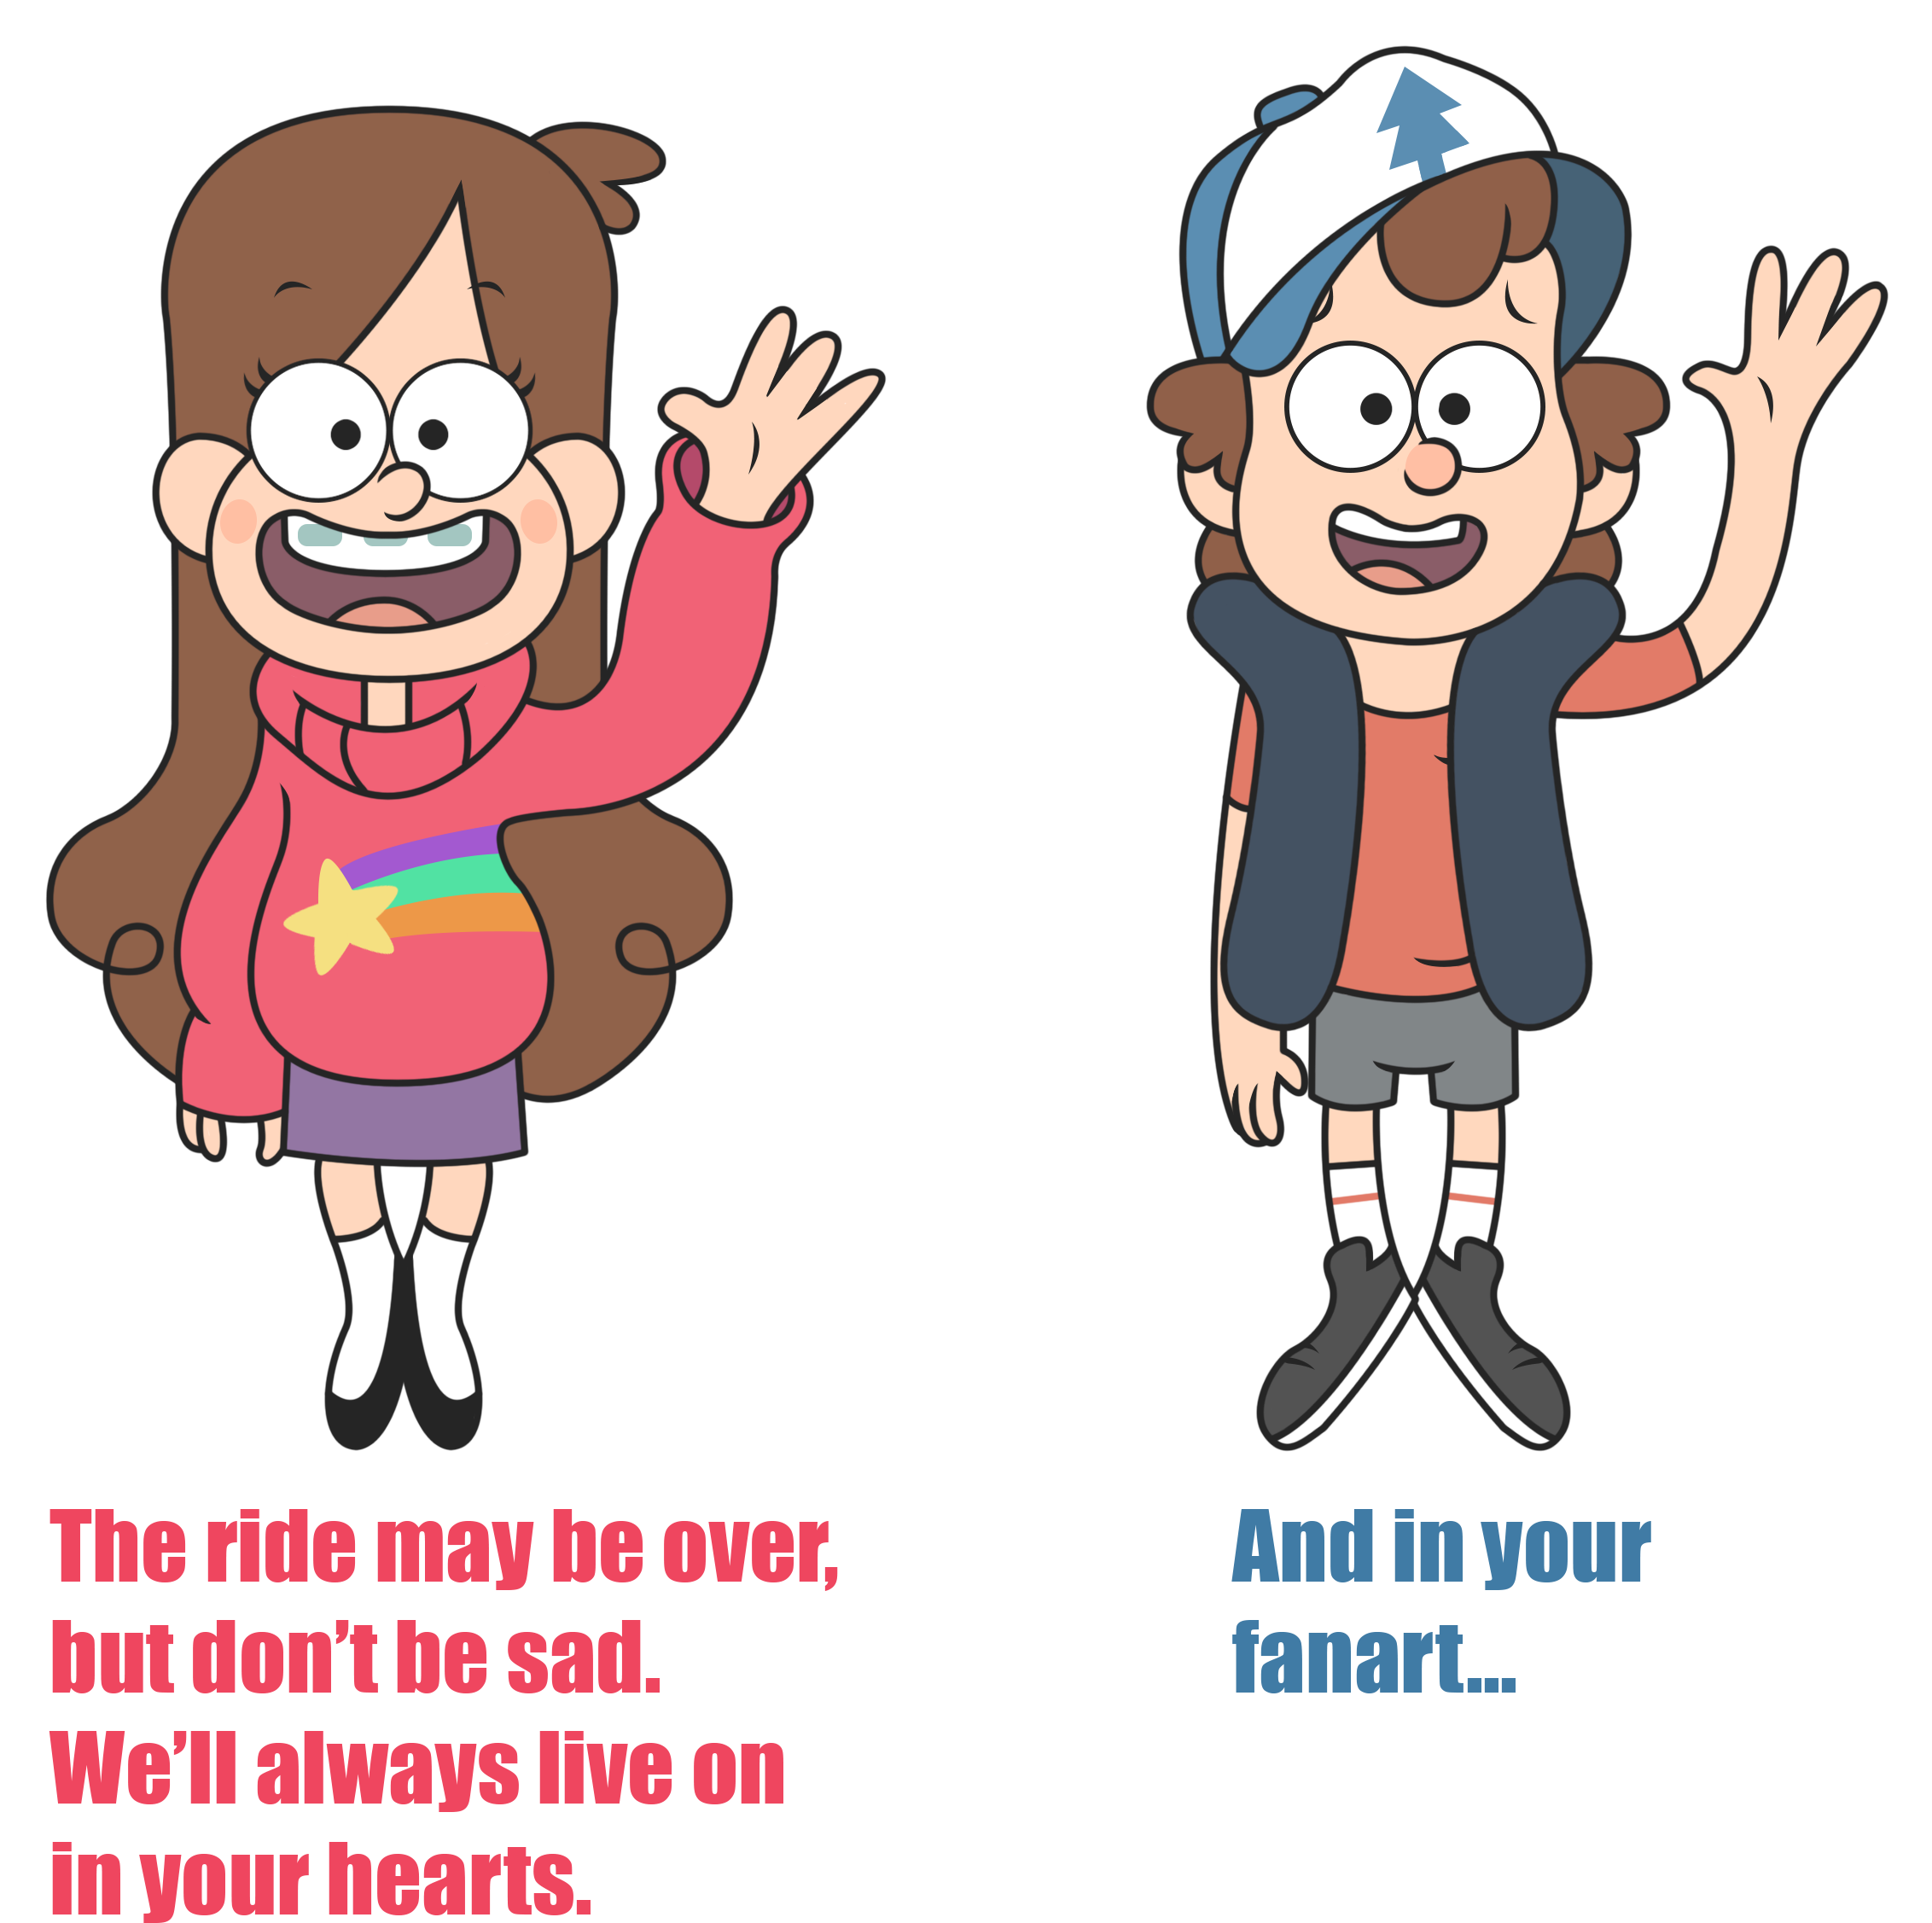 The Ride May Be Over But Don't Be Sad - Star Vs The Forces Of Evil And Gravity Falls (2556x2382)